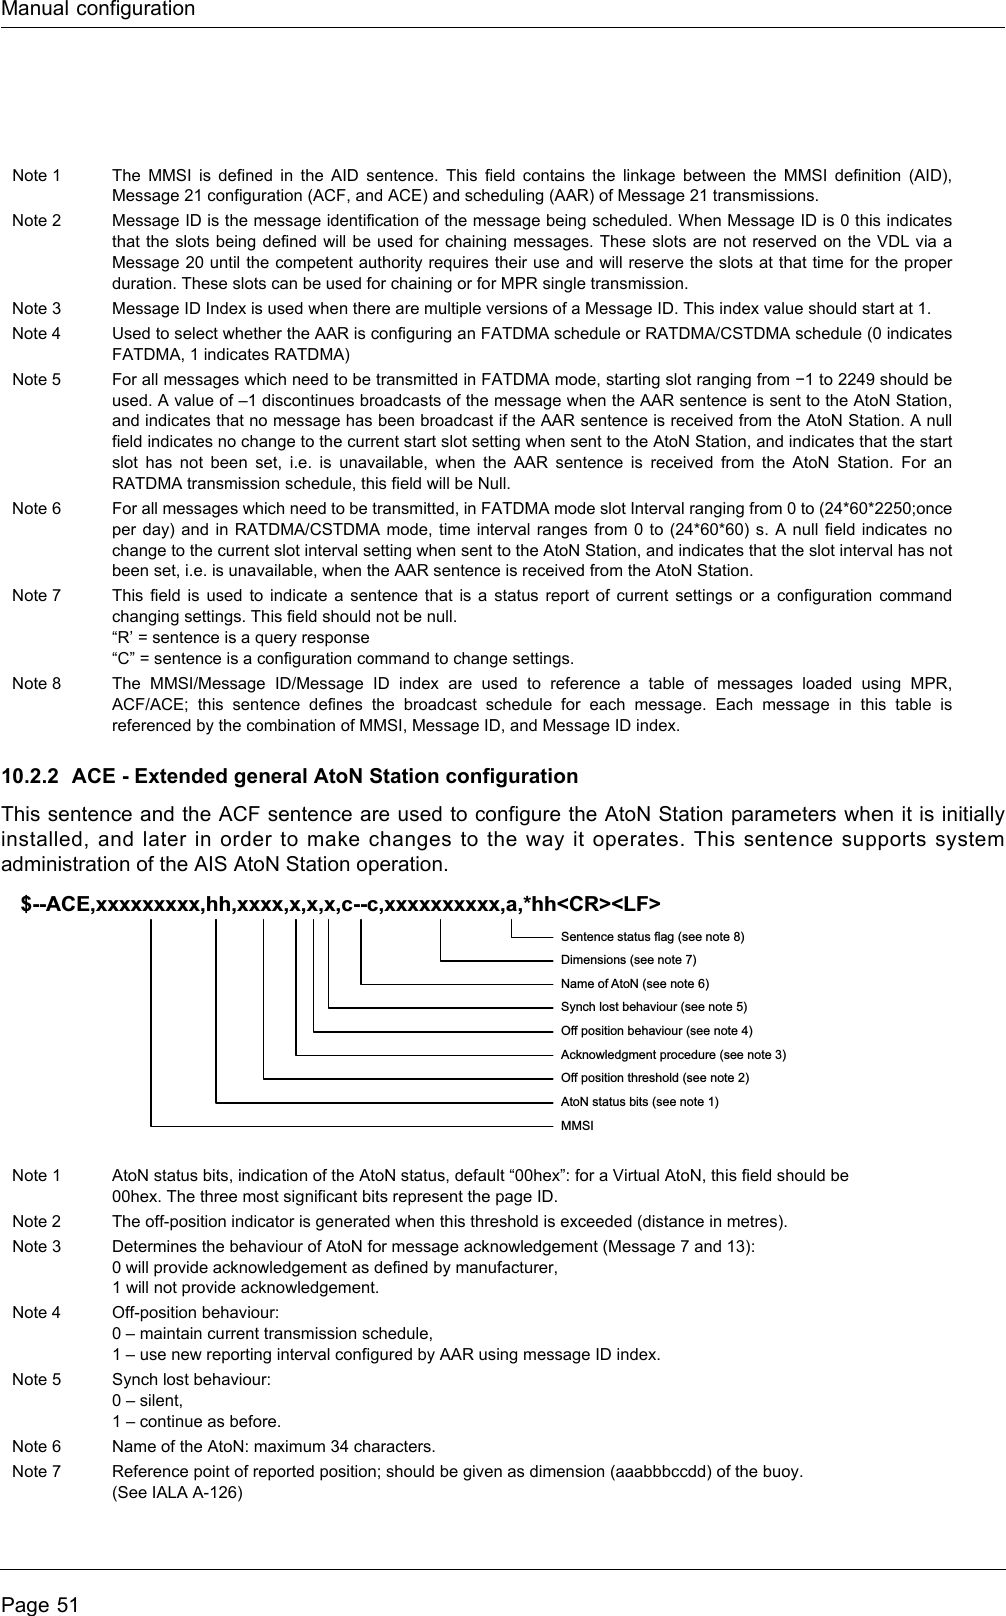 Manual configurationPage 5110.2.2 ACE - Extended general AtoN Station configurationThis sentence and the ACF sentence are used to configure the AtoN Station parameters when it is initially installed, and later in order to make changes to the way it operates. This sentence supports system administration of the AIS AtoN Station operation.Note 1 The MMSI is defined in the AID sentence. This field contains the linkage between the MMSI definition (AID), Message 21 configuration (ACF, and ACE) and scheduling (AAR) of Message 21 transmissions.Note 2 Message ID is the message identification of the message being scheduled. When Message ID is 0 this indicates that the slots being defined will be used for chaining messages. These slots are not reserved on the VDL via a Message 20 until the competent authority requires their use and will reserve the slots at that time for the proper duration. These slots can be used for chaining or for MPR single transmission.Note 3 Message ID Index is used when there are multiple versions of a Message ID. This index value should start at 1.Note 4 Used to select whether the AAR is configuring an FATDMA schedule or RATDMA/CSTDMA schedule (0 indicates FATDMA, 1 indicates RATDMA)Note 5 For all messages which need to be transmitted in FATDMA mode, starting slot ranging from −1 to 2249 should be used. A value of –1 discontinues broadcasts of the message when the AAR sentence is sent to the AtoN Station, and indicates that no message has been broadcast if the AAR sentence is received from the AtoN Station. A null field indicates no change to the current start slot setting when sent to the AtoN Station, and indicates that the start slot has not been set, i.e. is unavailable, when the AAR sentence is received from the AtoN Station. For an RATDMA transmission schedule, this field will be Null.Note 6 For all messages which need to be transmitted, in FATDMA mode slot Interval ranging from 0 to (24*60*2250;once per day) and in RATDMA/CSTDMA mode, time interval ranges from 0 to (24*60*60) s. A null field indicates no change to the current slot interval setting when sent to the AtoN Station, and indicates that the slot interval has not been set, i.e. is unavailable, when the AAR sentence is received from the AtoN Station.Note 7 This field is used to indicate a sentence that is a status report of current settings or a configuration command changing settings. This field should not be null.“R’ = sentence is a query response“C” = sentence is a configuration command to change settings.Note 8 The MMSI/Message ID/Message ID index are used to reference a table of messages loaded using MPR, ACF/ACE; this sentence defines the broadcast schedule for each message. Each message in this table is referenced by the combination of MMSI, Message ID, and Message ID index.Note 1 AtoN status bits, indication of the AtoN status, default “00hex”: for a Virtual AtoN, this field should be00hex. The three most significant bits represent the page ID.Note 2 The off-position indicator is generated when this threshold is exceeded (distance in metres).Note 3 Determines the behaviour of AtoN for message acknowledgement (Message 7 and 13):0 will provide acknowledgement as defined by manufacturer,1 will not provide acknowledgement.Note 4 Off-position behaviour:0 – maintain current transmission schedule,1 – use new reporting interval configured by AAR using message ID index.Note 5 Synch lost behaviour:0 – silent,1 – continue as before.Note 6 Name of the AtoN: maximum 34 characters.Note 7 Reference point of reported position; should be given as dimension (aaabbbccdd) of the buoy.(See IALA A-126)Sentence status flag (see note 8)Dimensions (see note 7)Name of AtoN (see note 6)Synch lost behaviour (see note 5)Off position behaviour (see note 4)Acknowledgment procedure (see note 3)Off position threshold (see note 2)AtoN status bits (see note 1)MMSI  $--ACE,xxxxxxxxx,hh,xxxx,x,x,x,c--c,xxxxxxxxxx,a,*hh&lt;CR&gt;&lt;LF&gt;